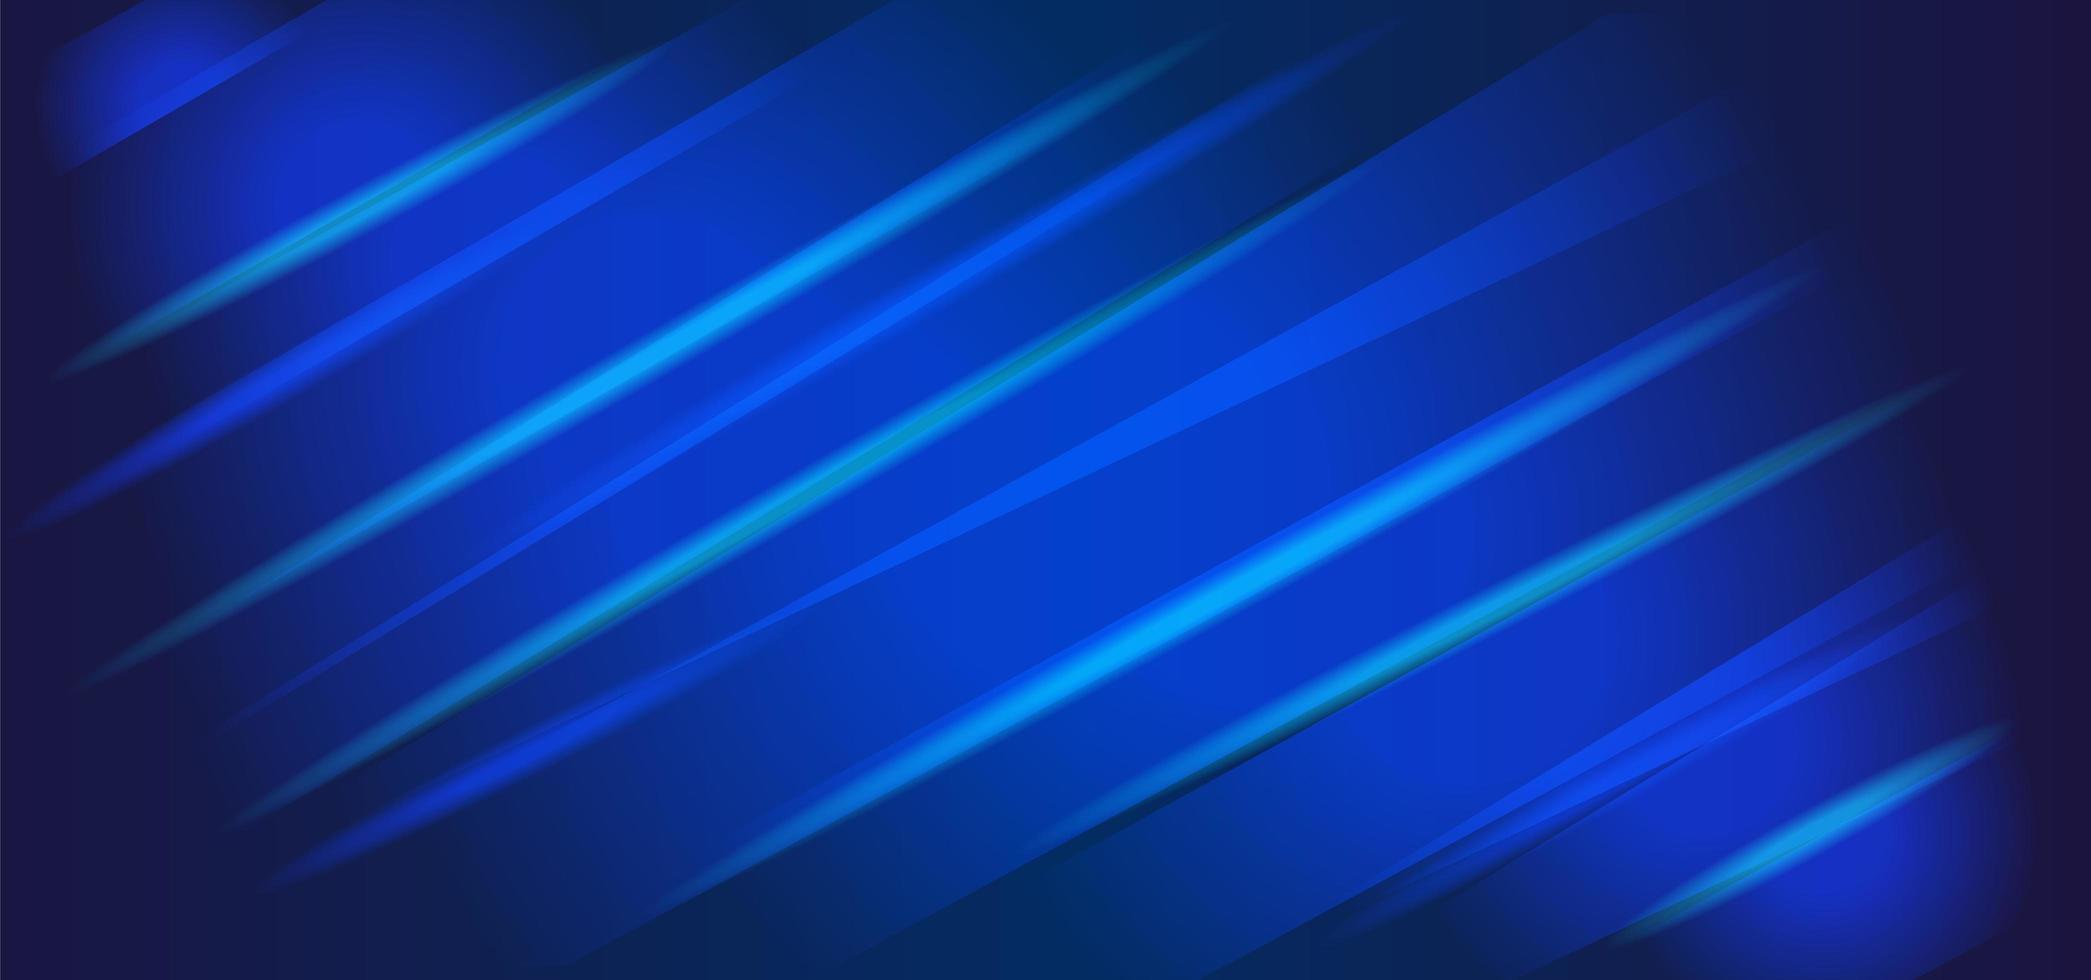 Glowing abstract blue line art design Download Free